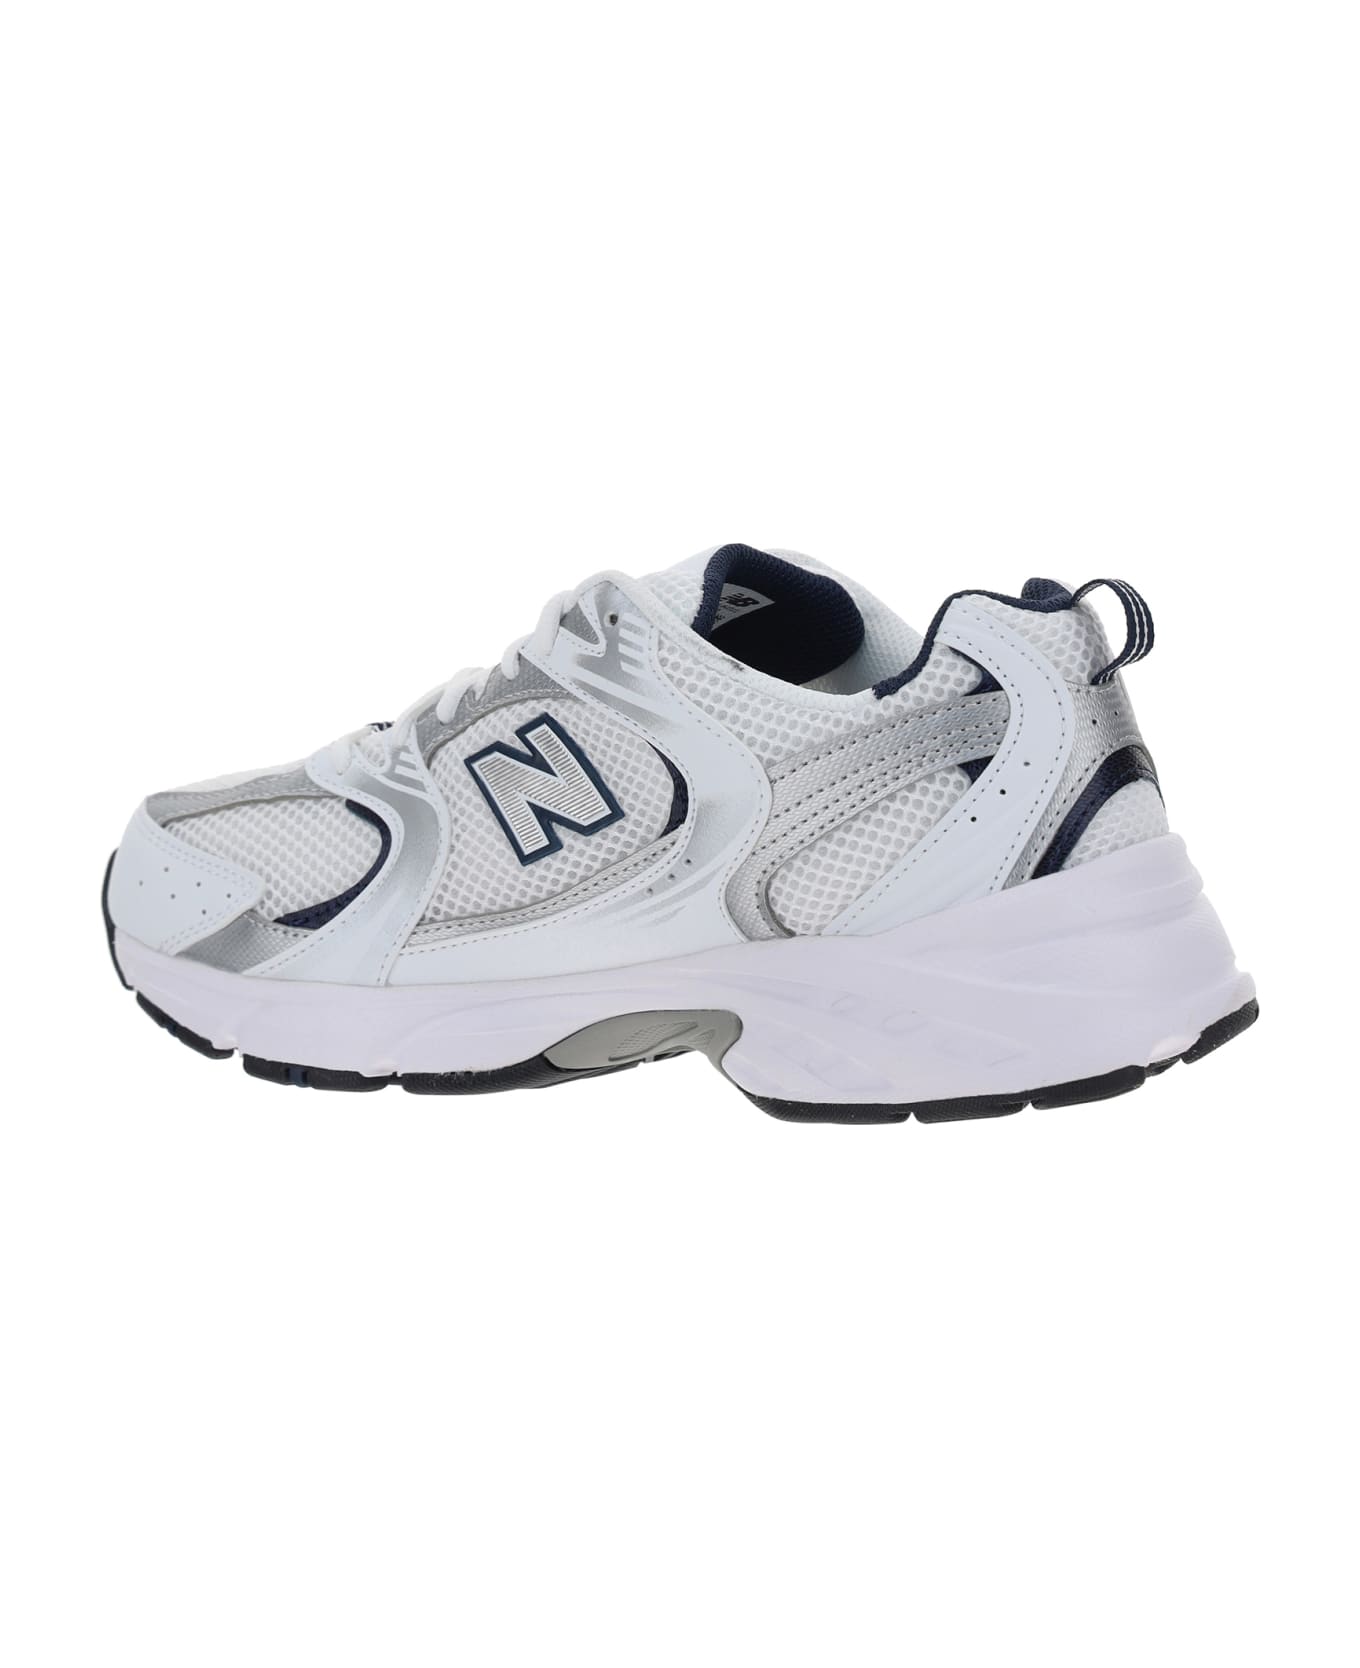 New Balance Lifestyle Sneakers - White/blue D スニーカー